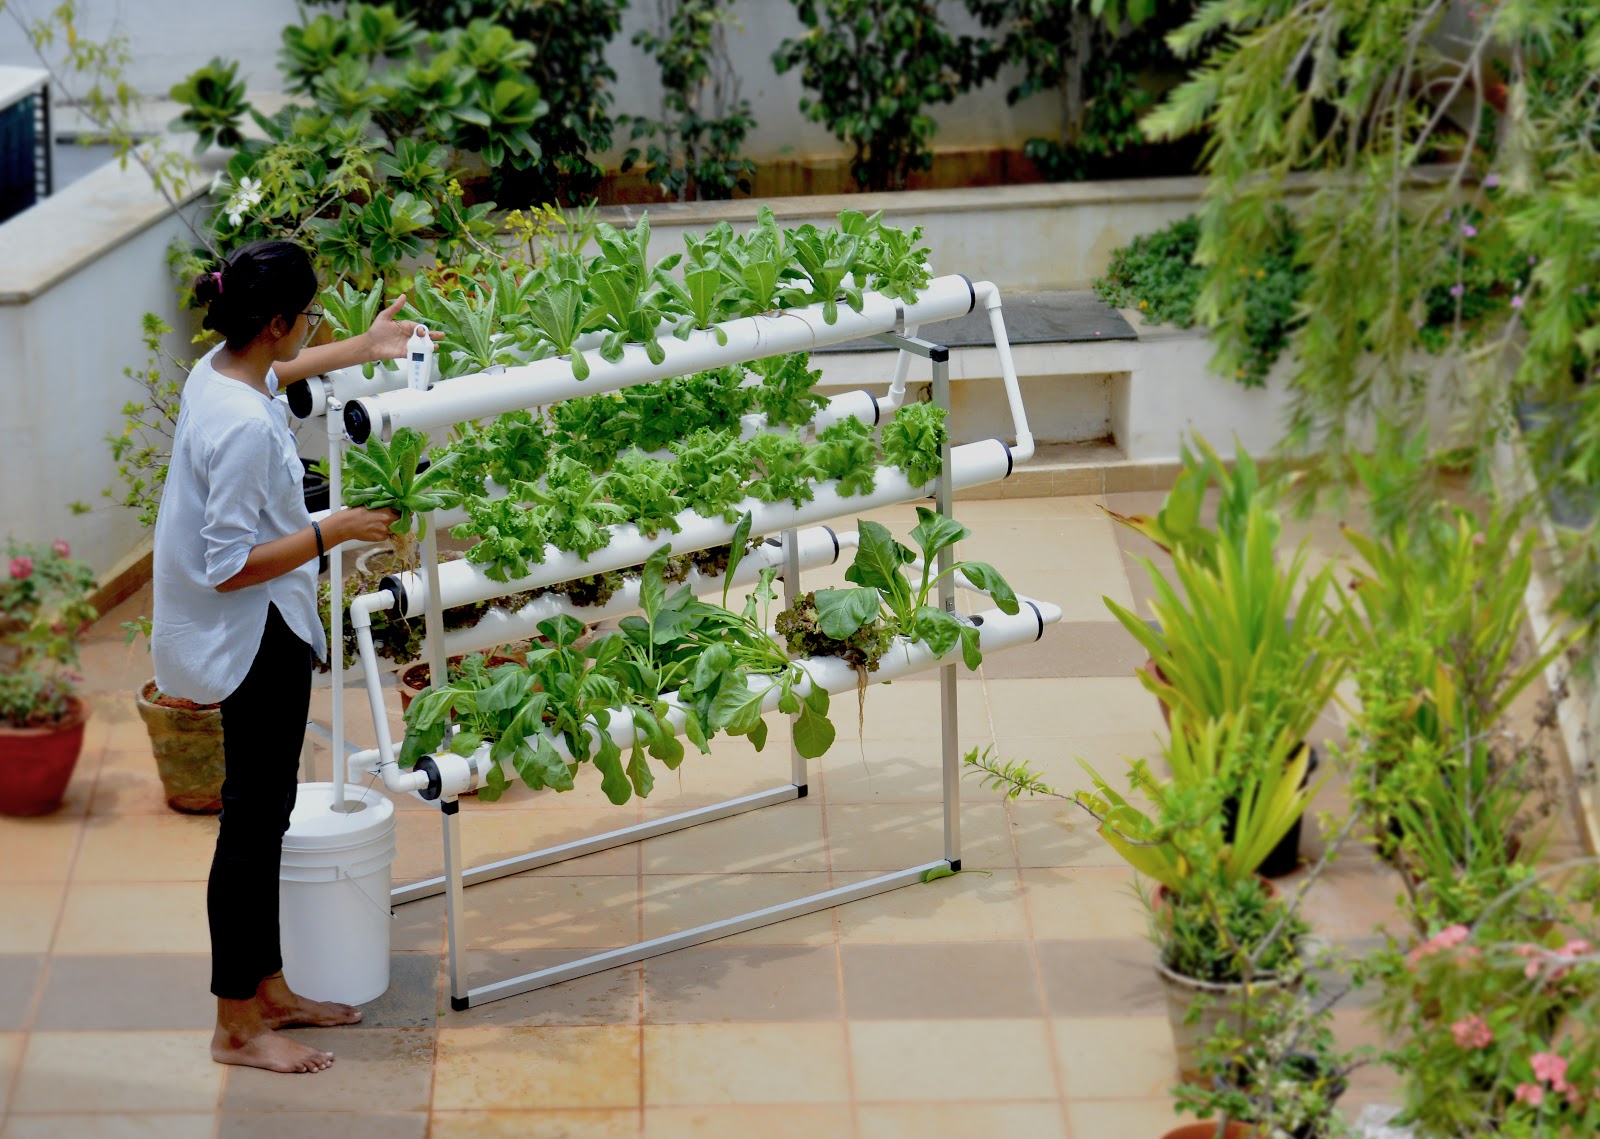 Hydroponic Supplies